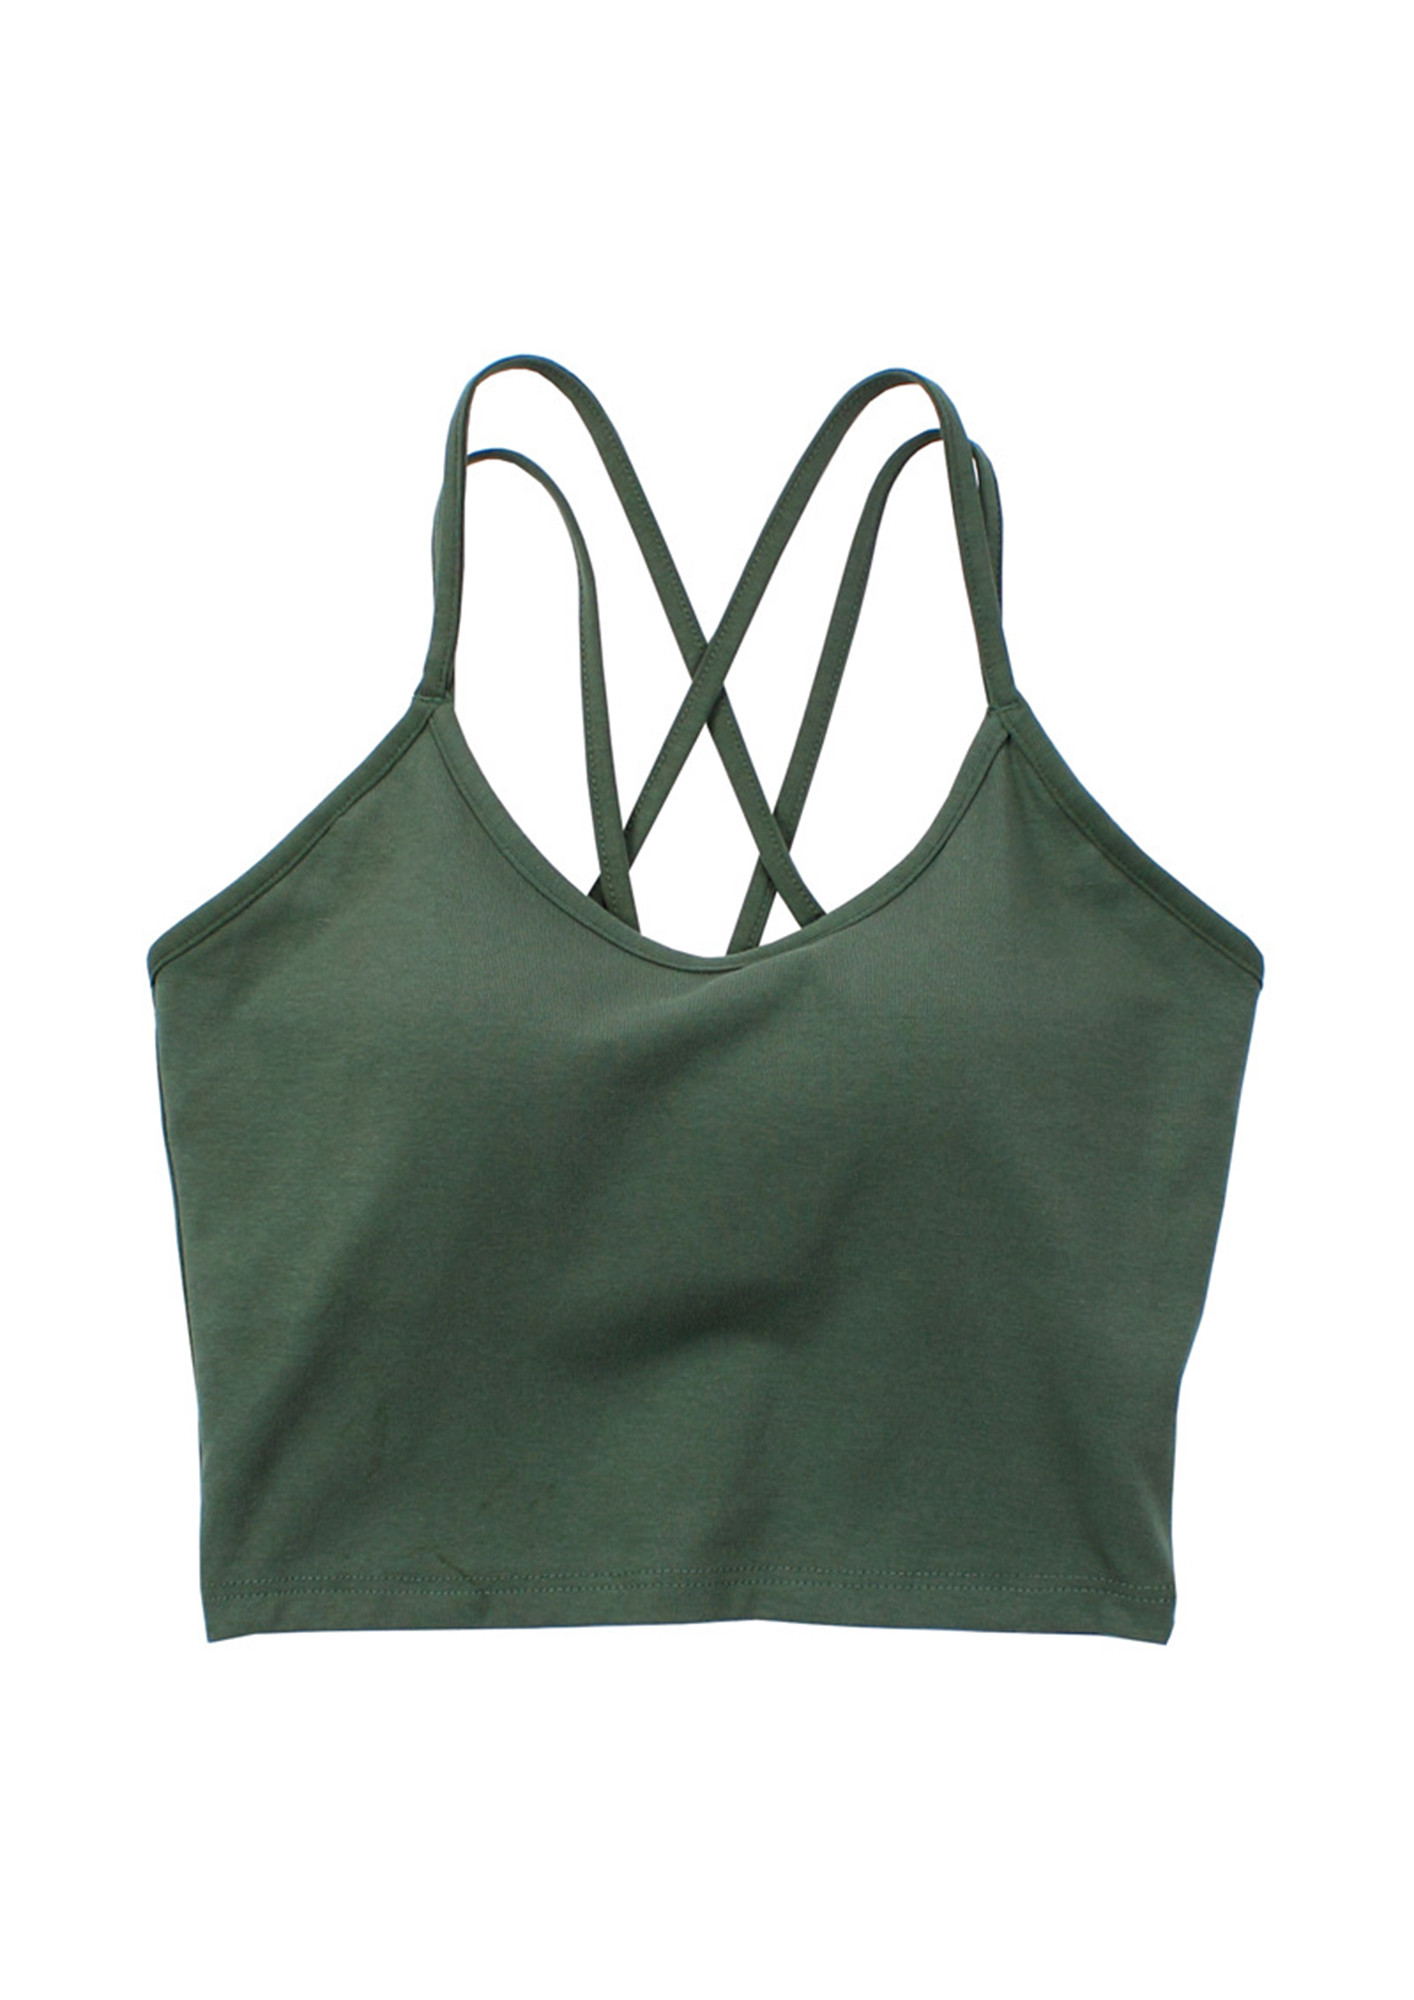 EDGY VIBES GREEN CROP TOP